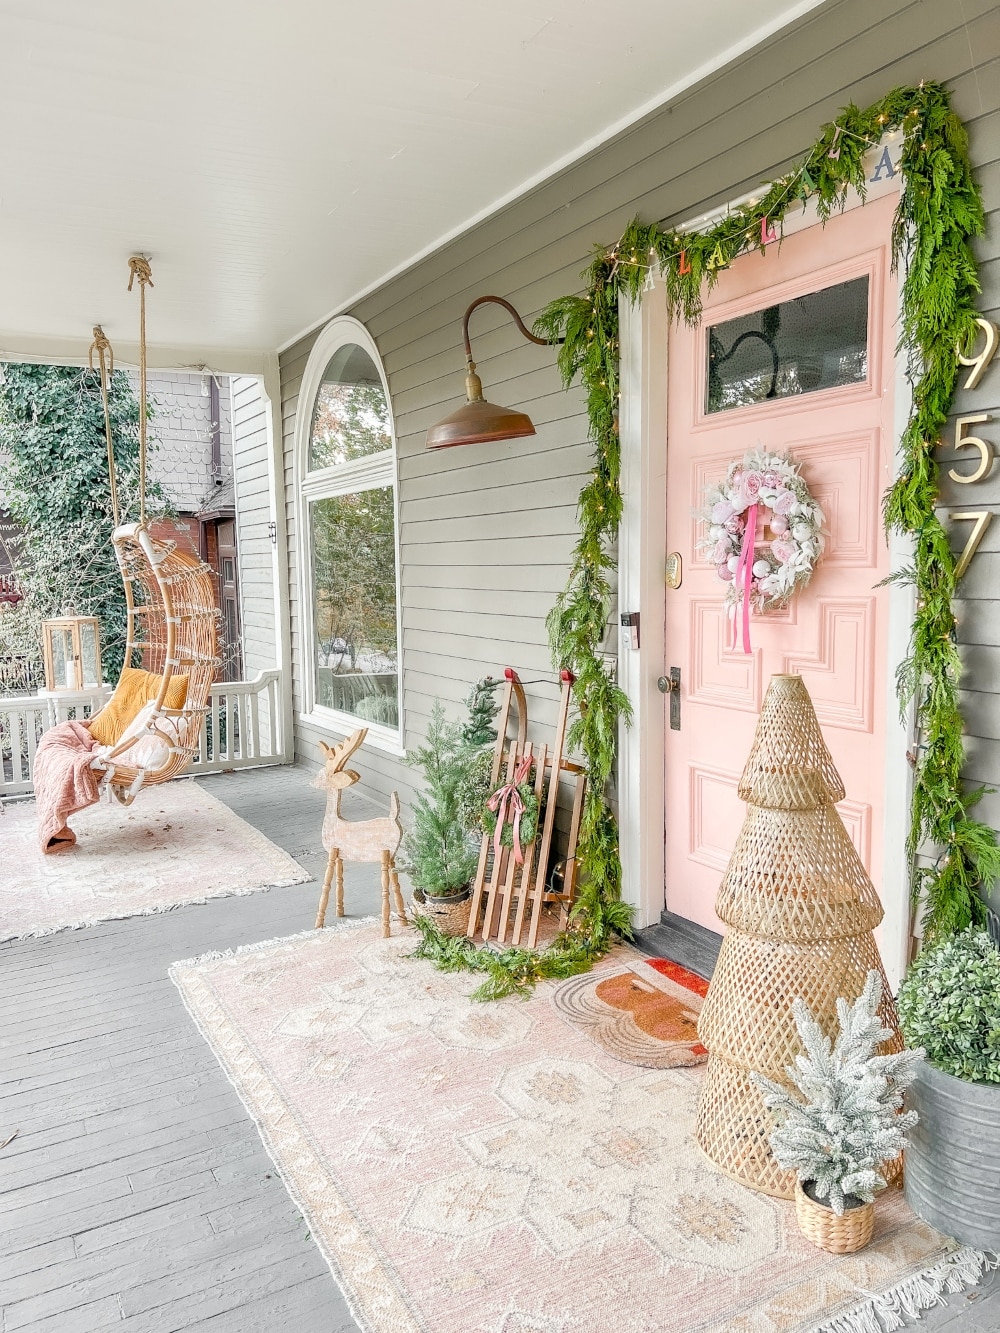 1891 Cottage Bright Holiday Tour. I'm sharing some easy ideas to bring happy colors to your home this holiday season!